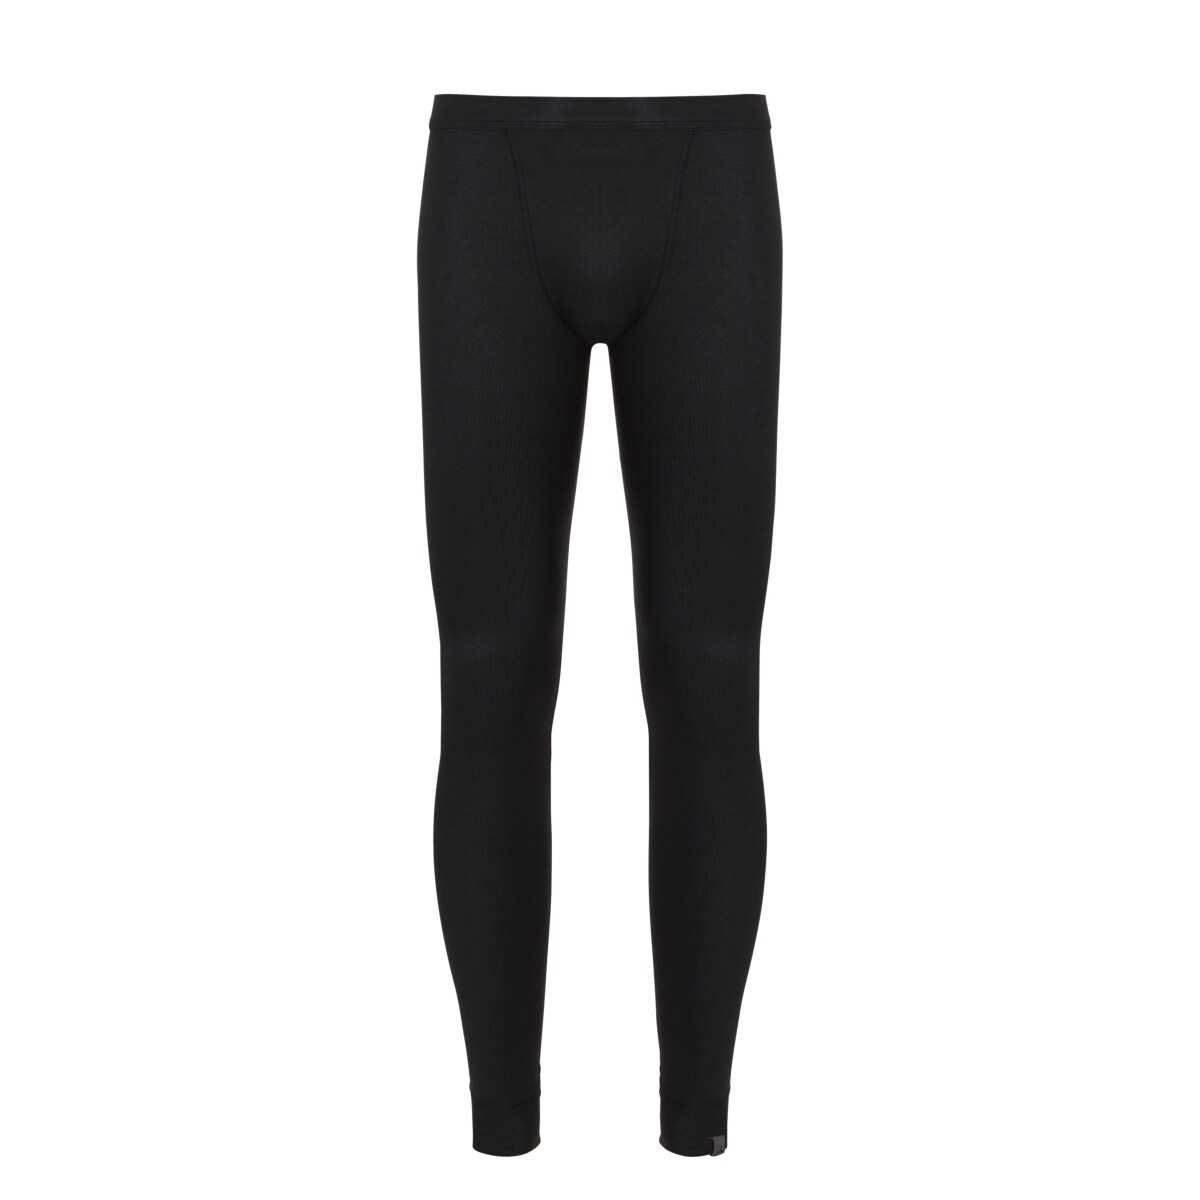 Ten Cate Thermo men pants